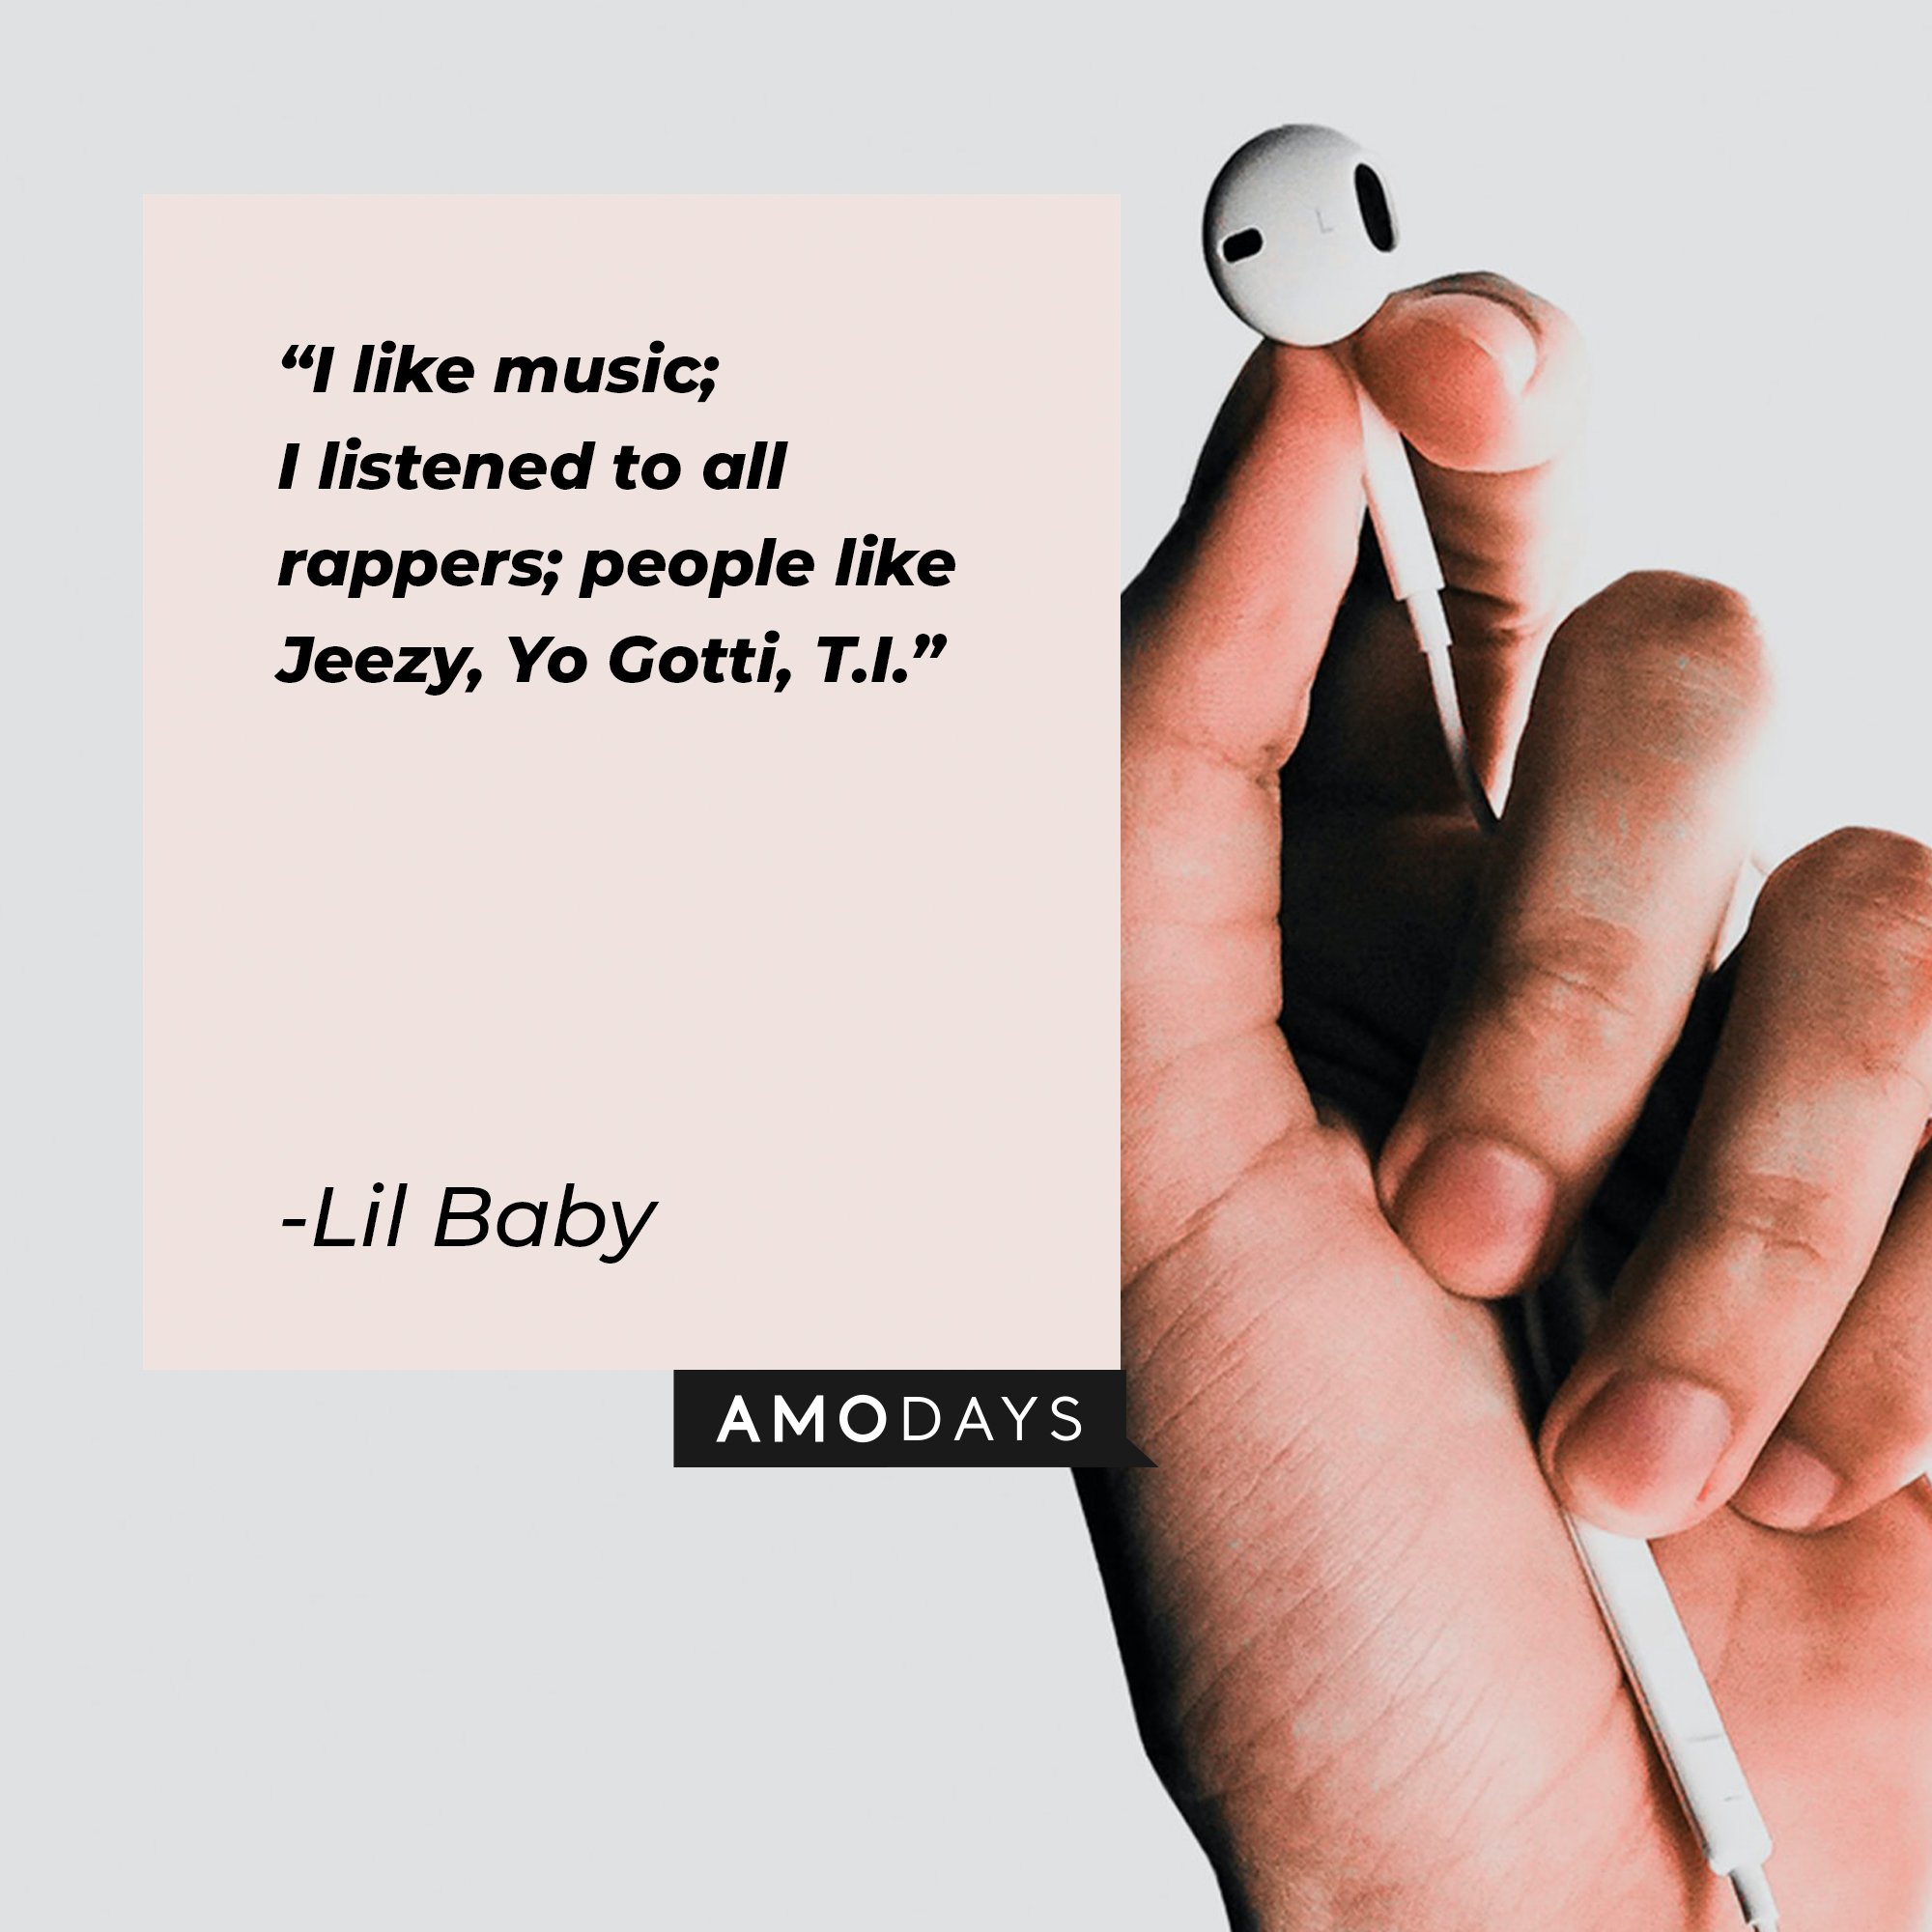  Lil Baby’s quote: "I like music; I listened to all rappers; people like Jeezy, Yo Gotti, T.I." | Image: AmoDays